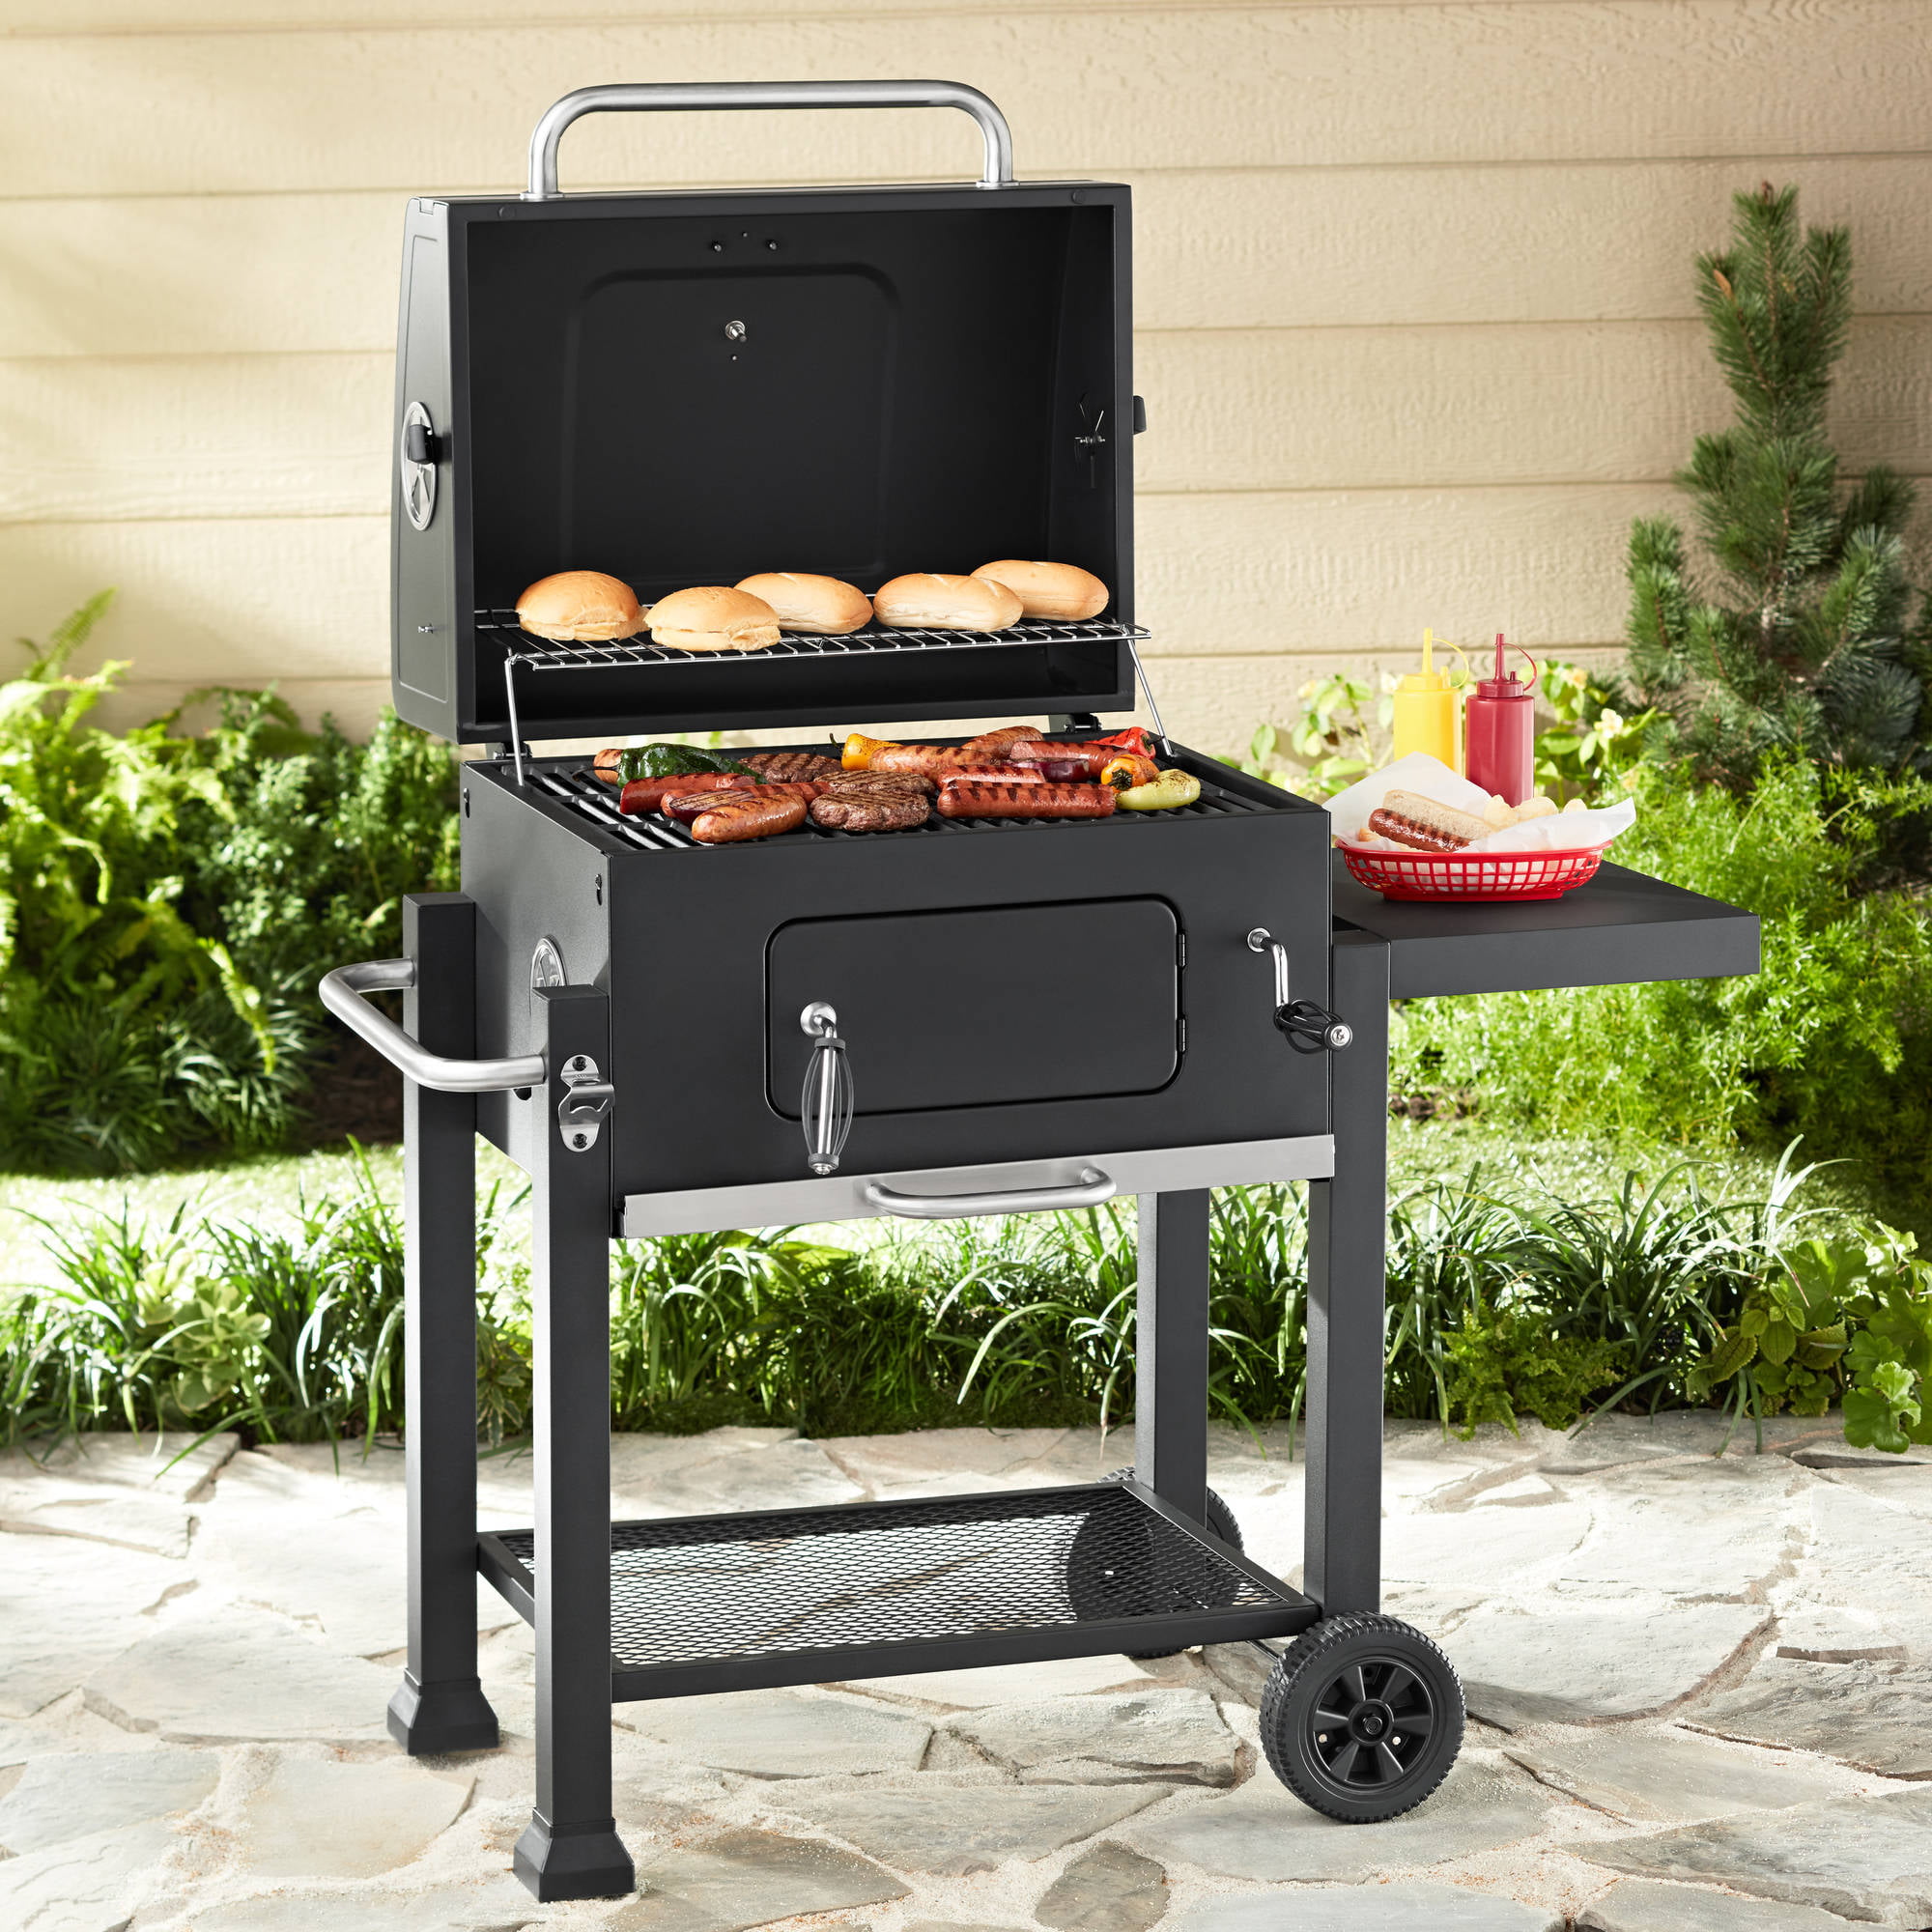 Kitchenaid Charcoal Outdoor Grill Outdoor Designs